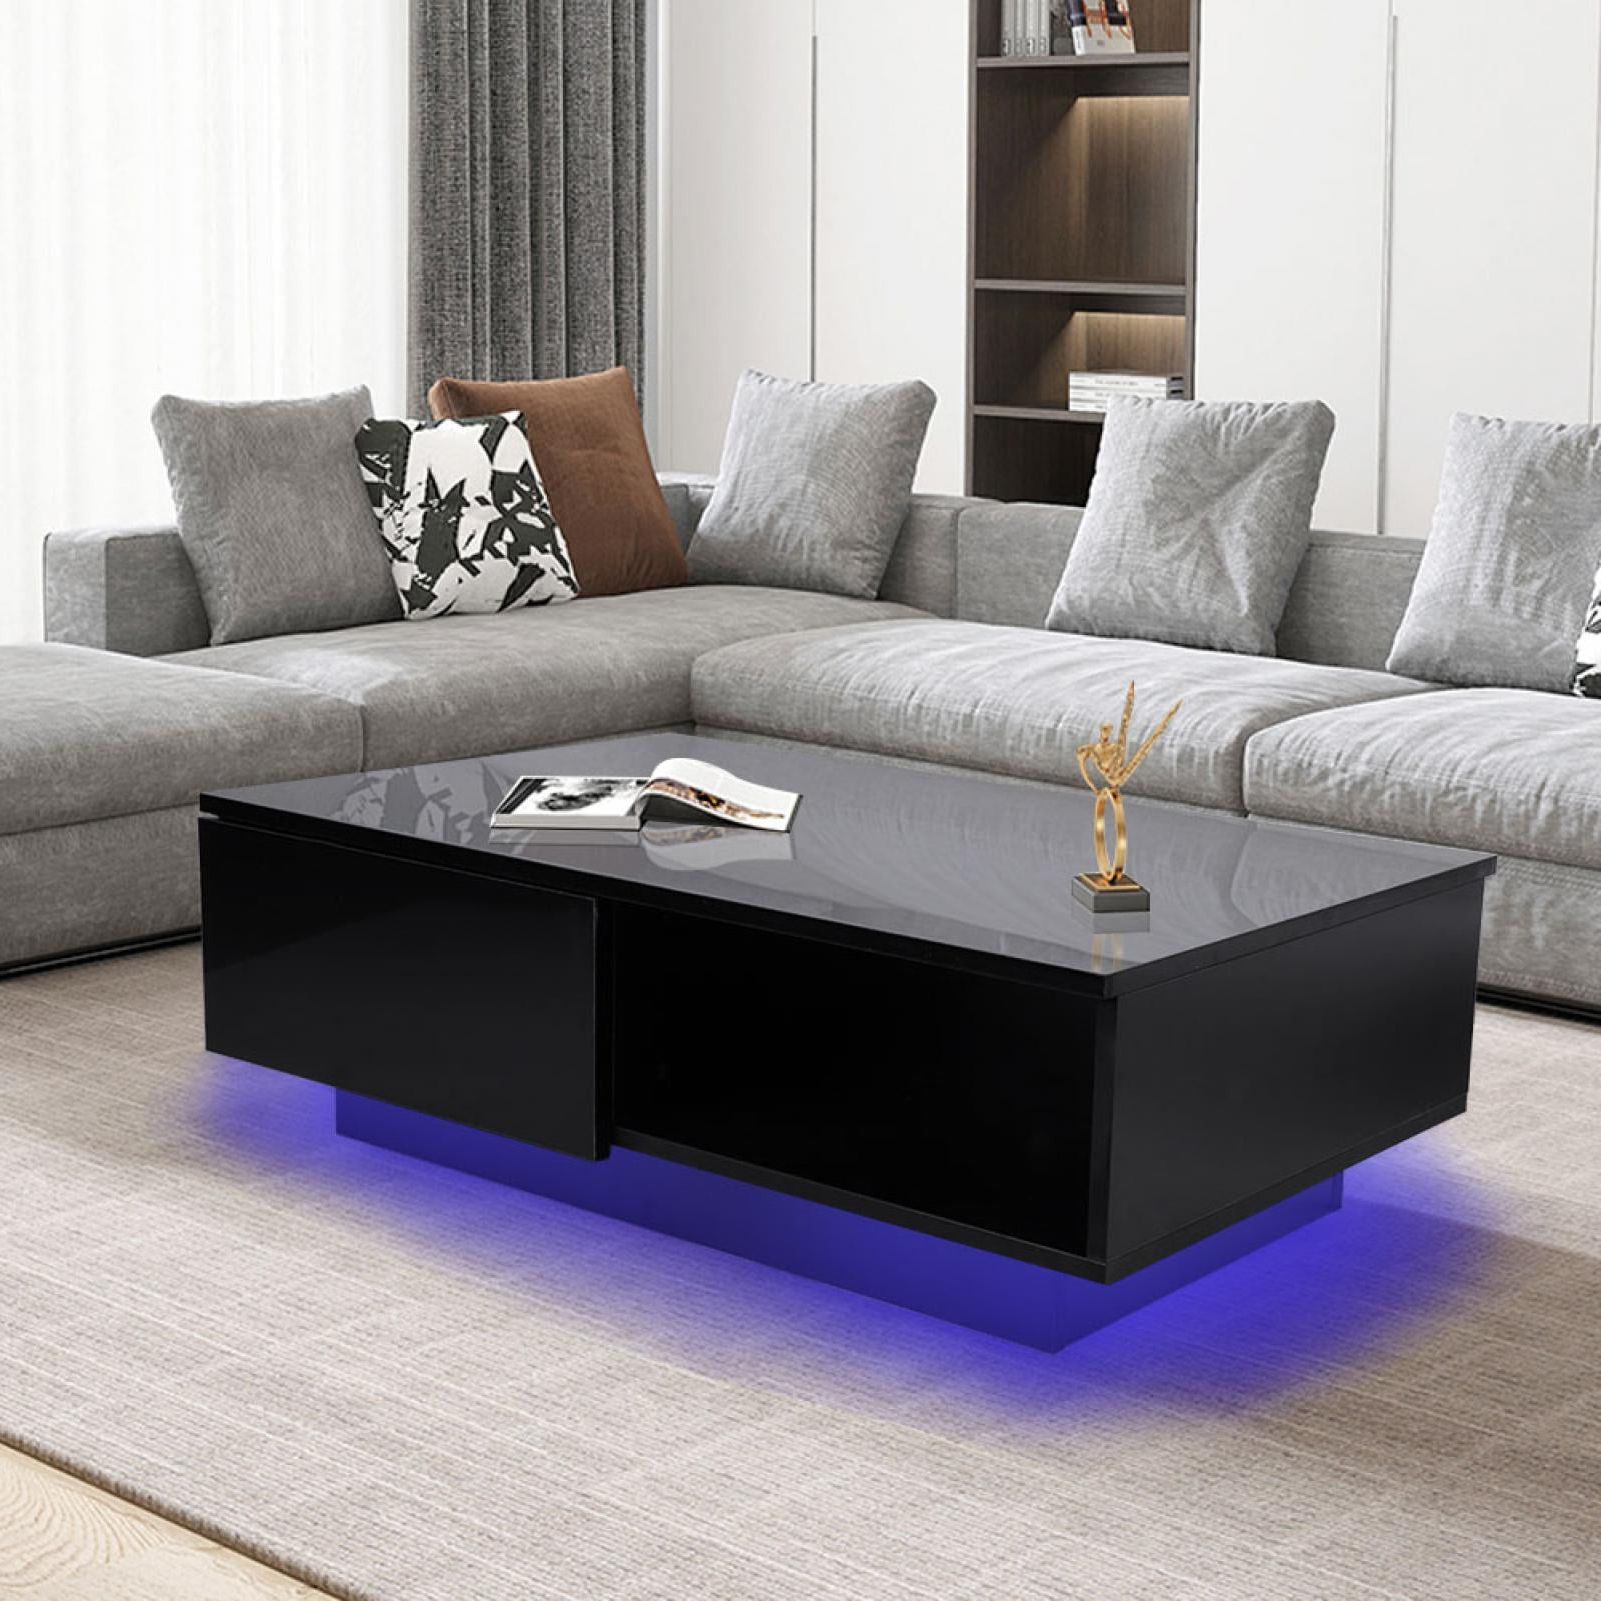 Latest Rectangular Led Coffee Tables Inside Ebtools Rectangle Led Coffee Table, Black Modern High Gloss Furniture  Coffee Table Living Room Storage Table With Drawer And Led Light –  Walmart (View 3 of 10)